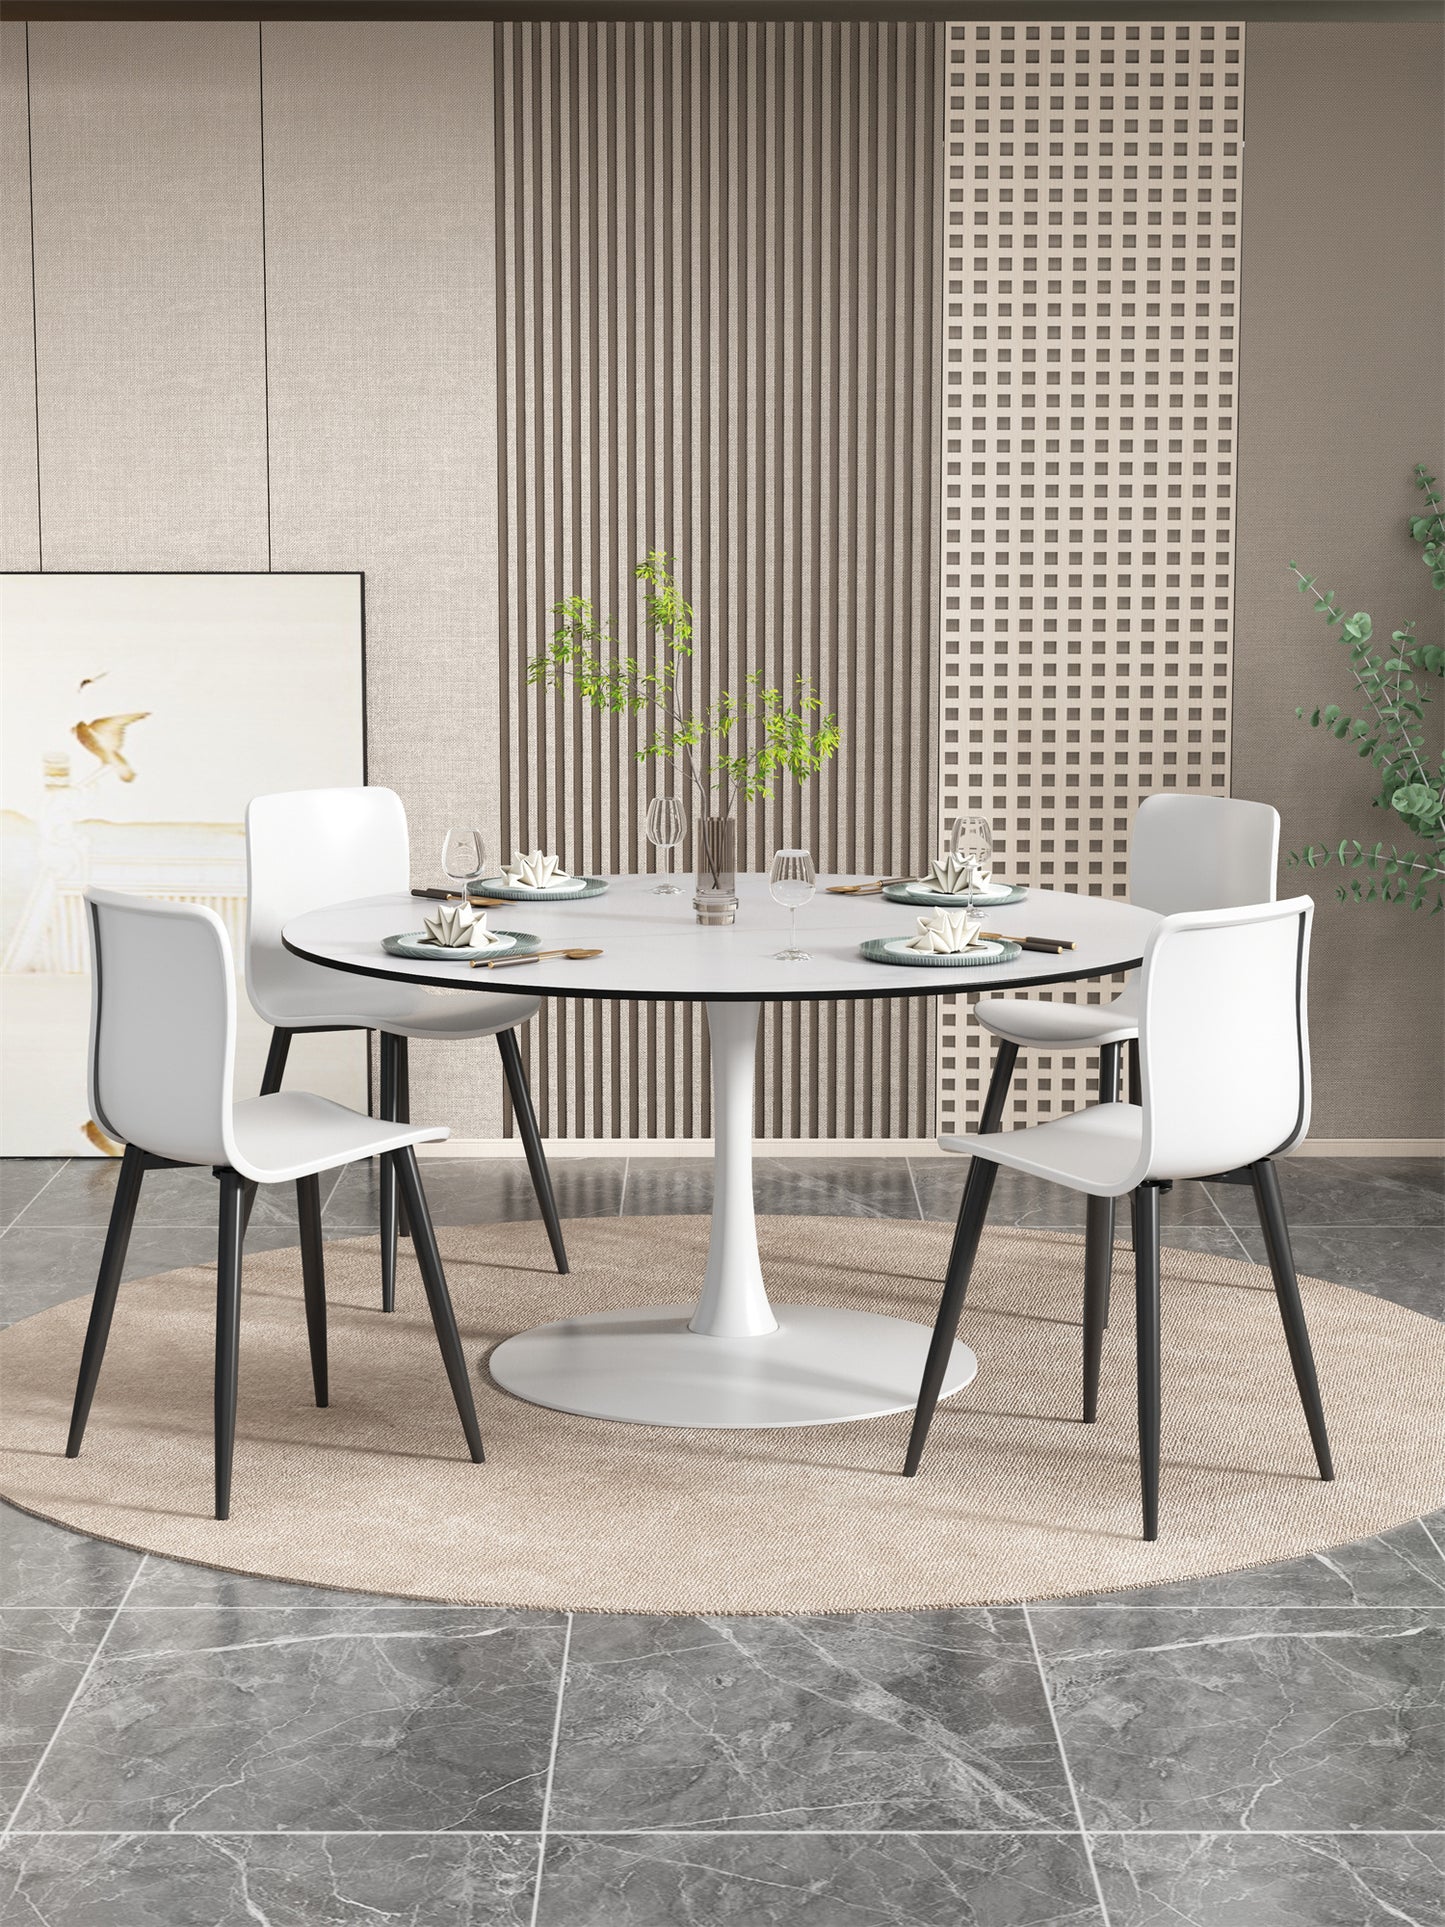 BTMWAY 42-Inch Round Mid-Century Gray Tulip Dining Room Table, Contemporary Breakfast Nook Dining Table for 2~4 Person, Cocktail Table Leisure Table, A3500